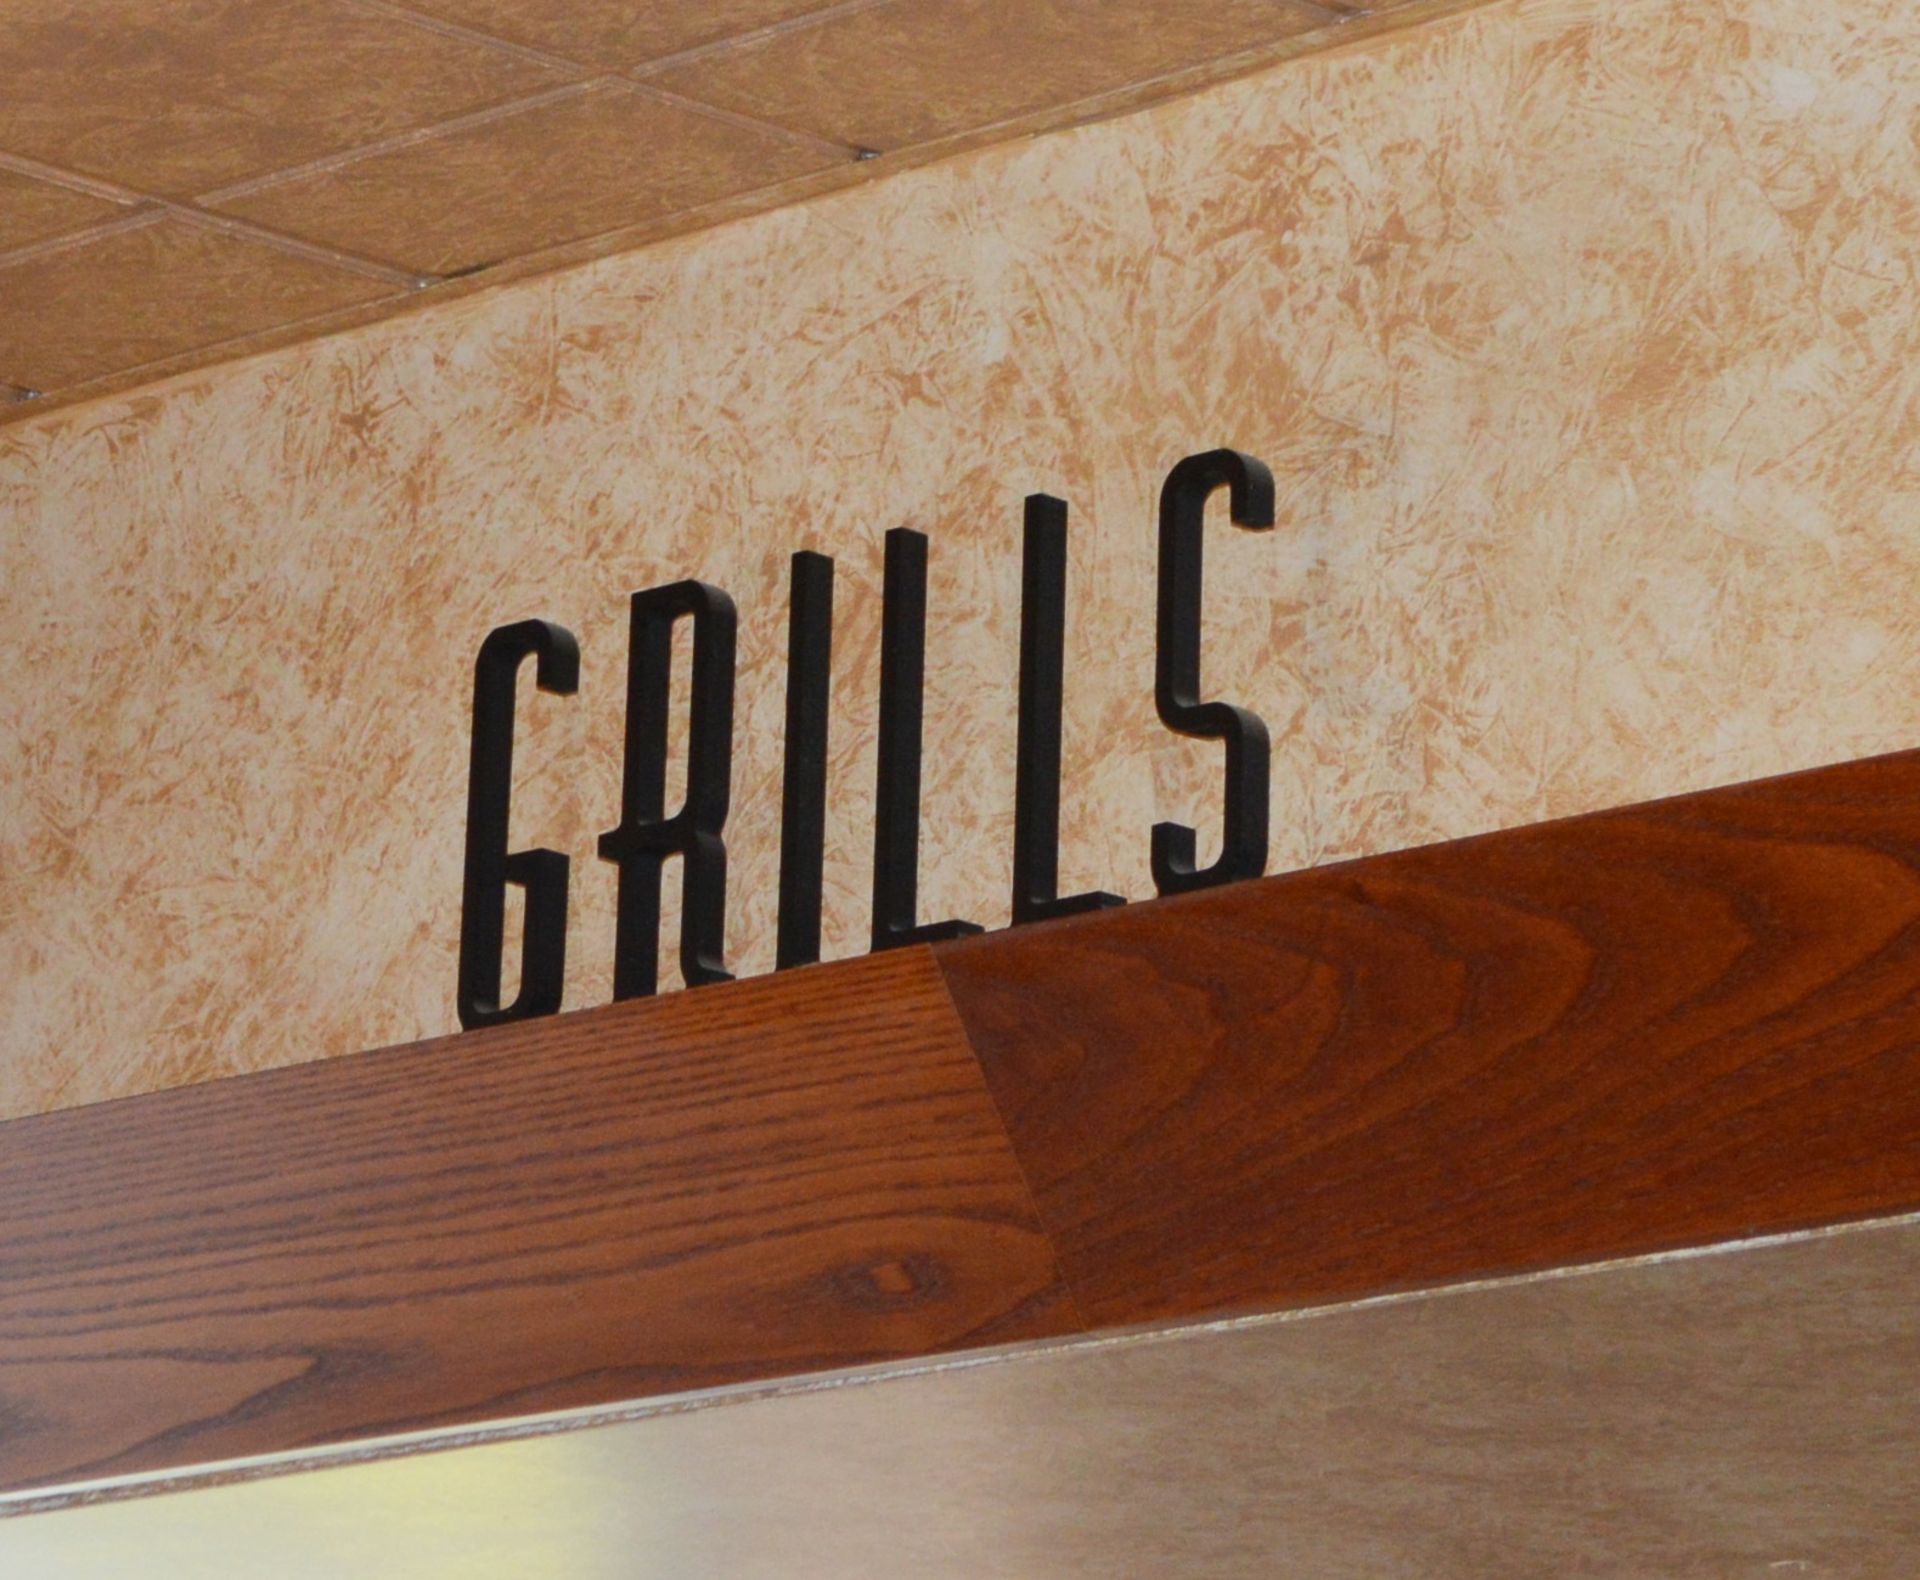 40 x Wooden Signs Suitable For Restaurants, Cafes, Bistros etc - Includes Grills, Amaretto, Penne, - Image 31 of 31